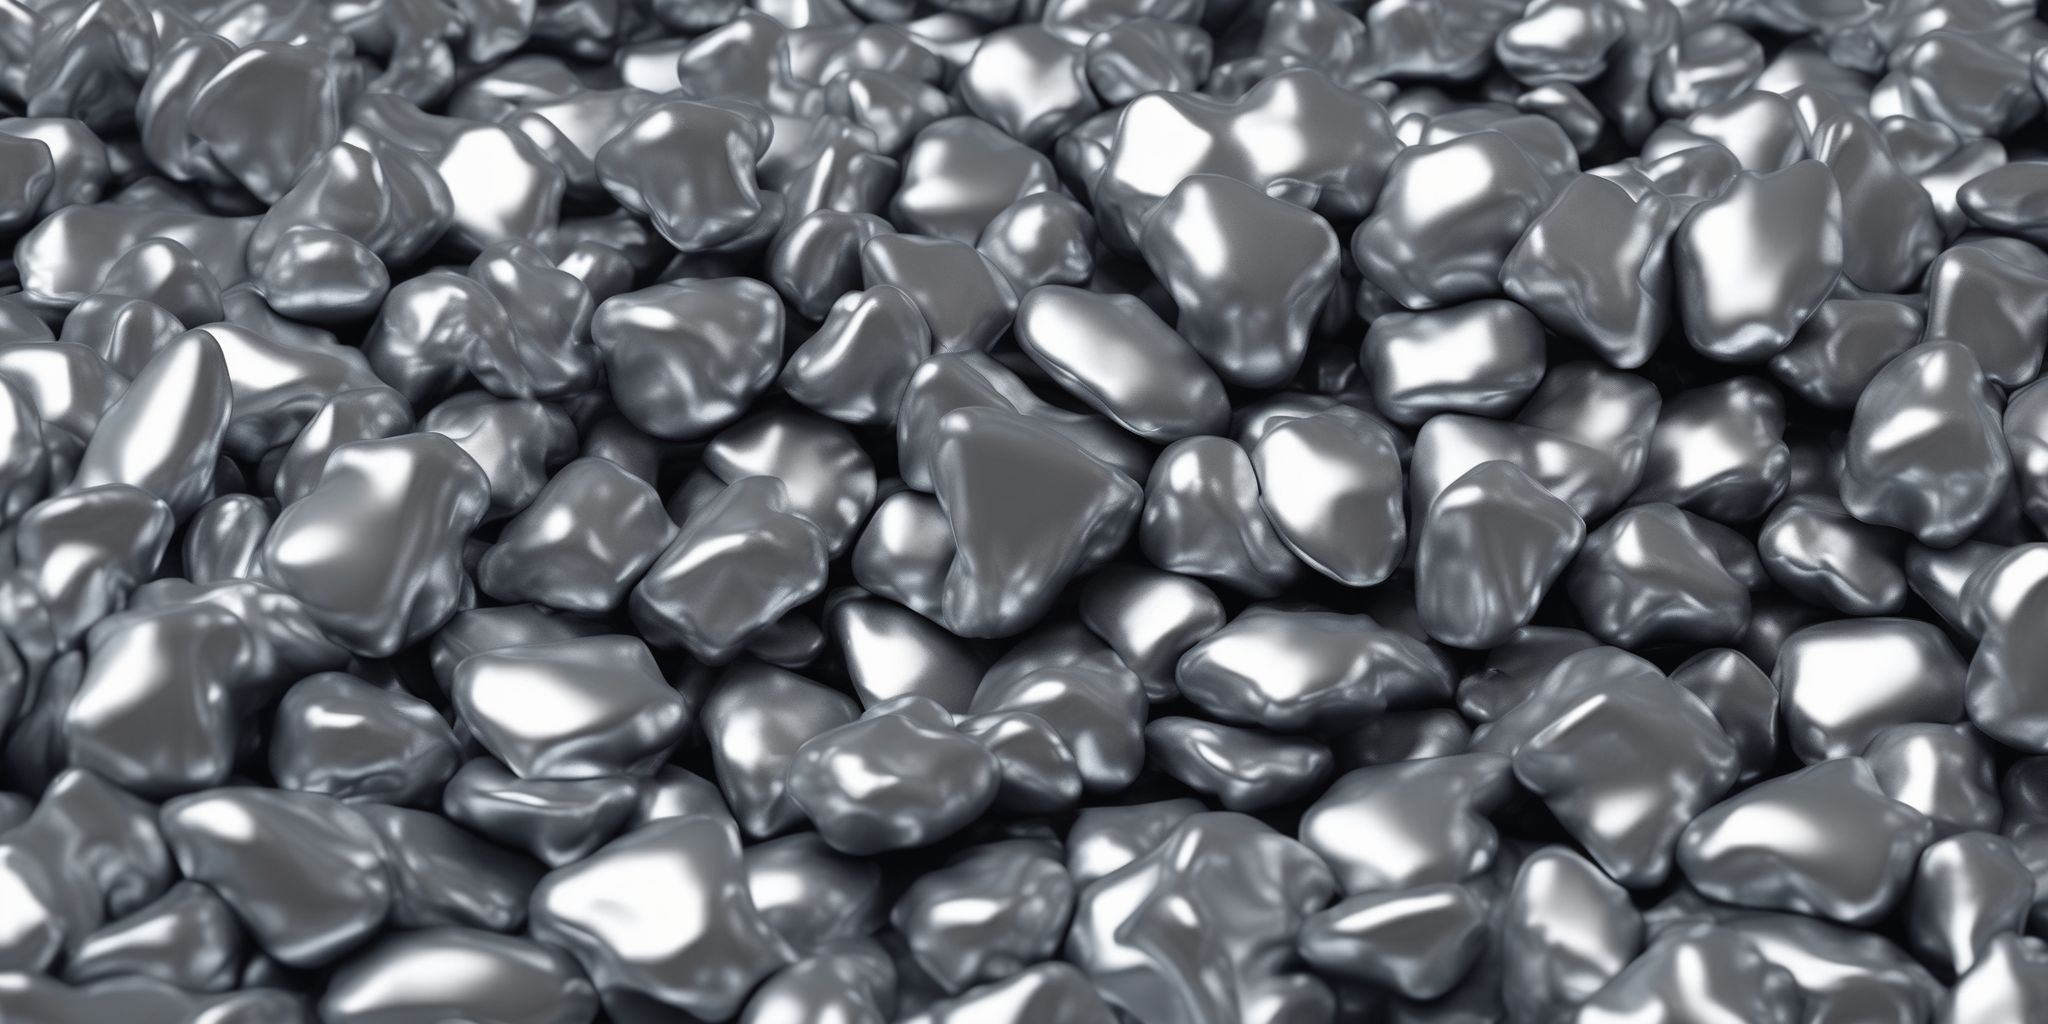 Zinc  in realistic, photographic style